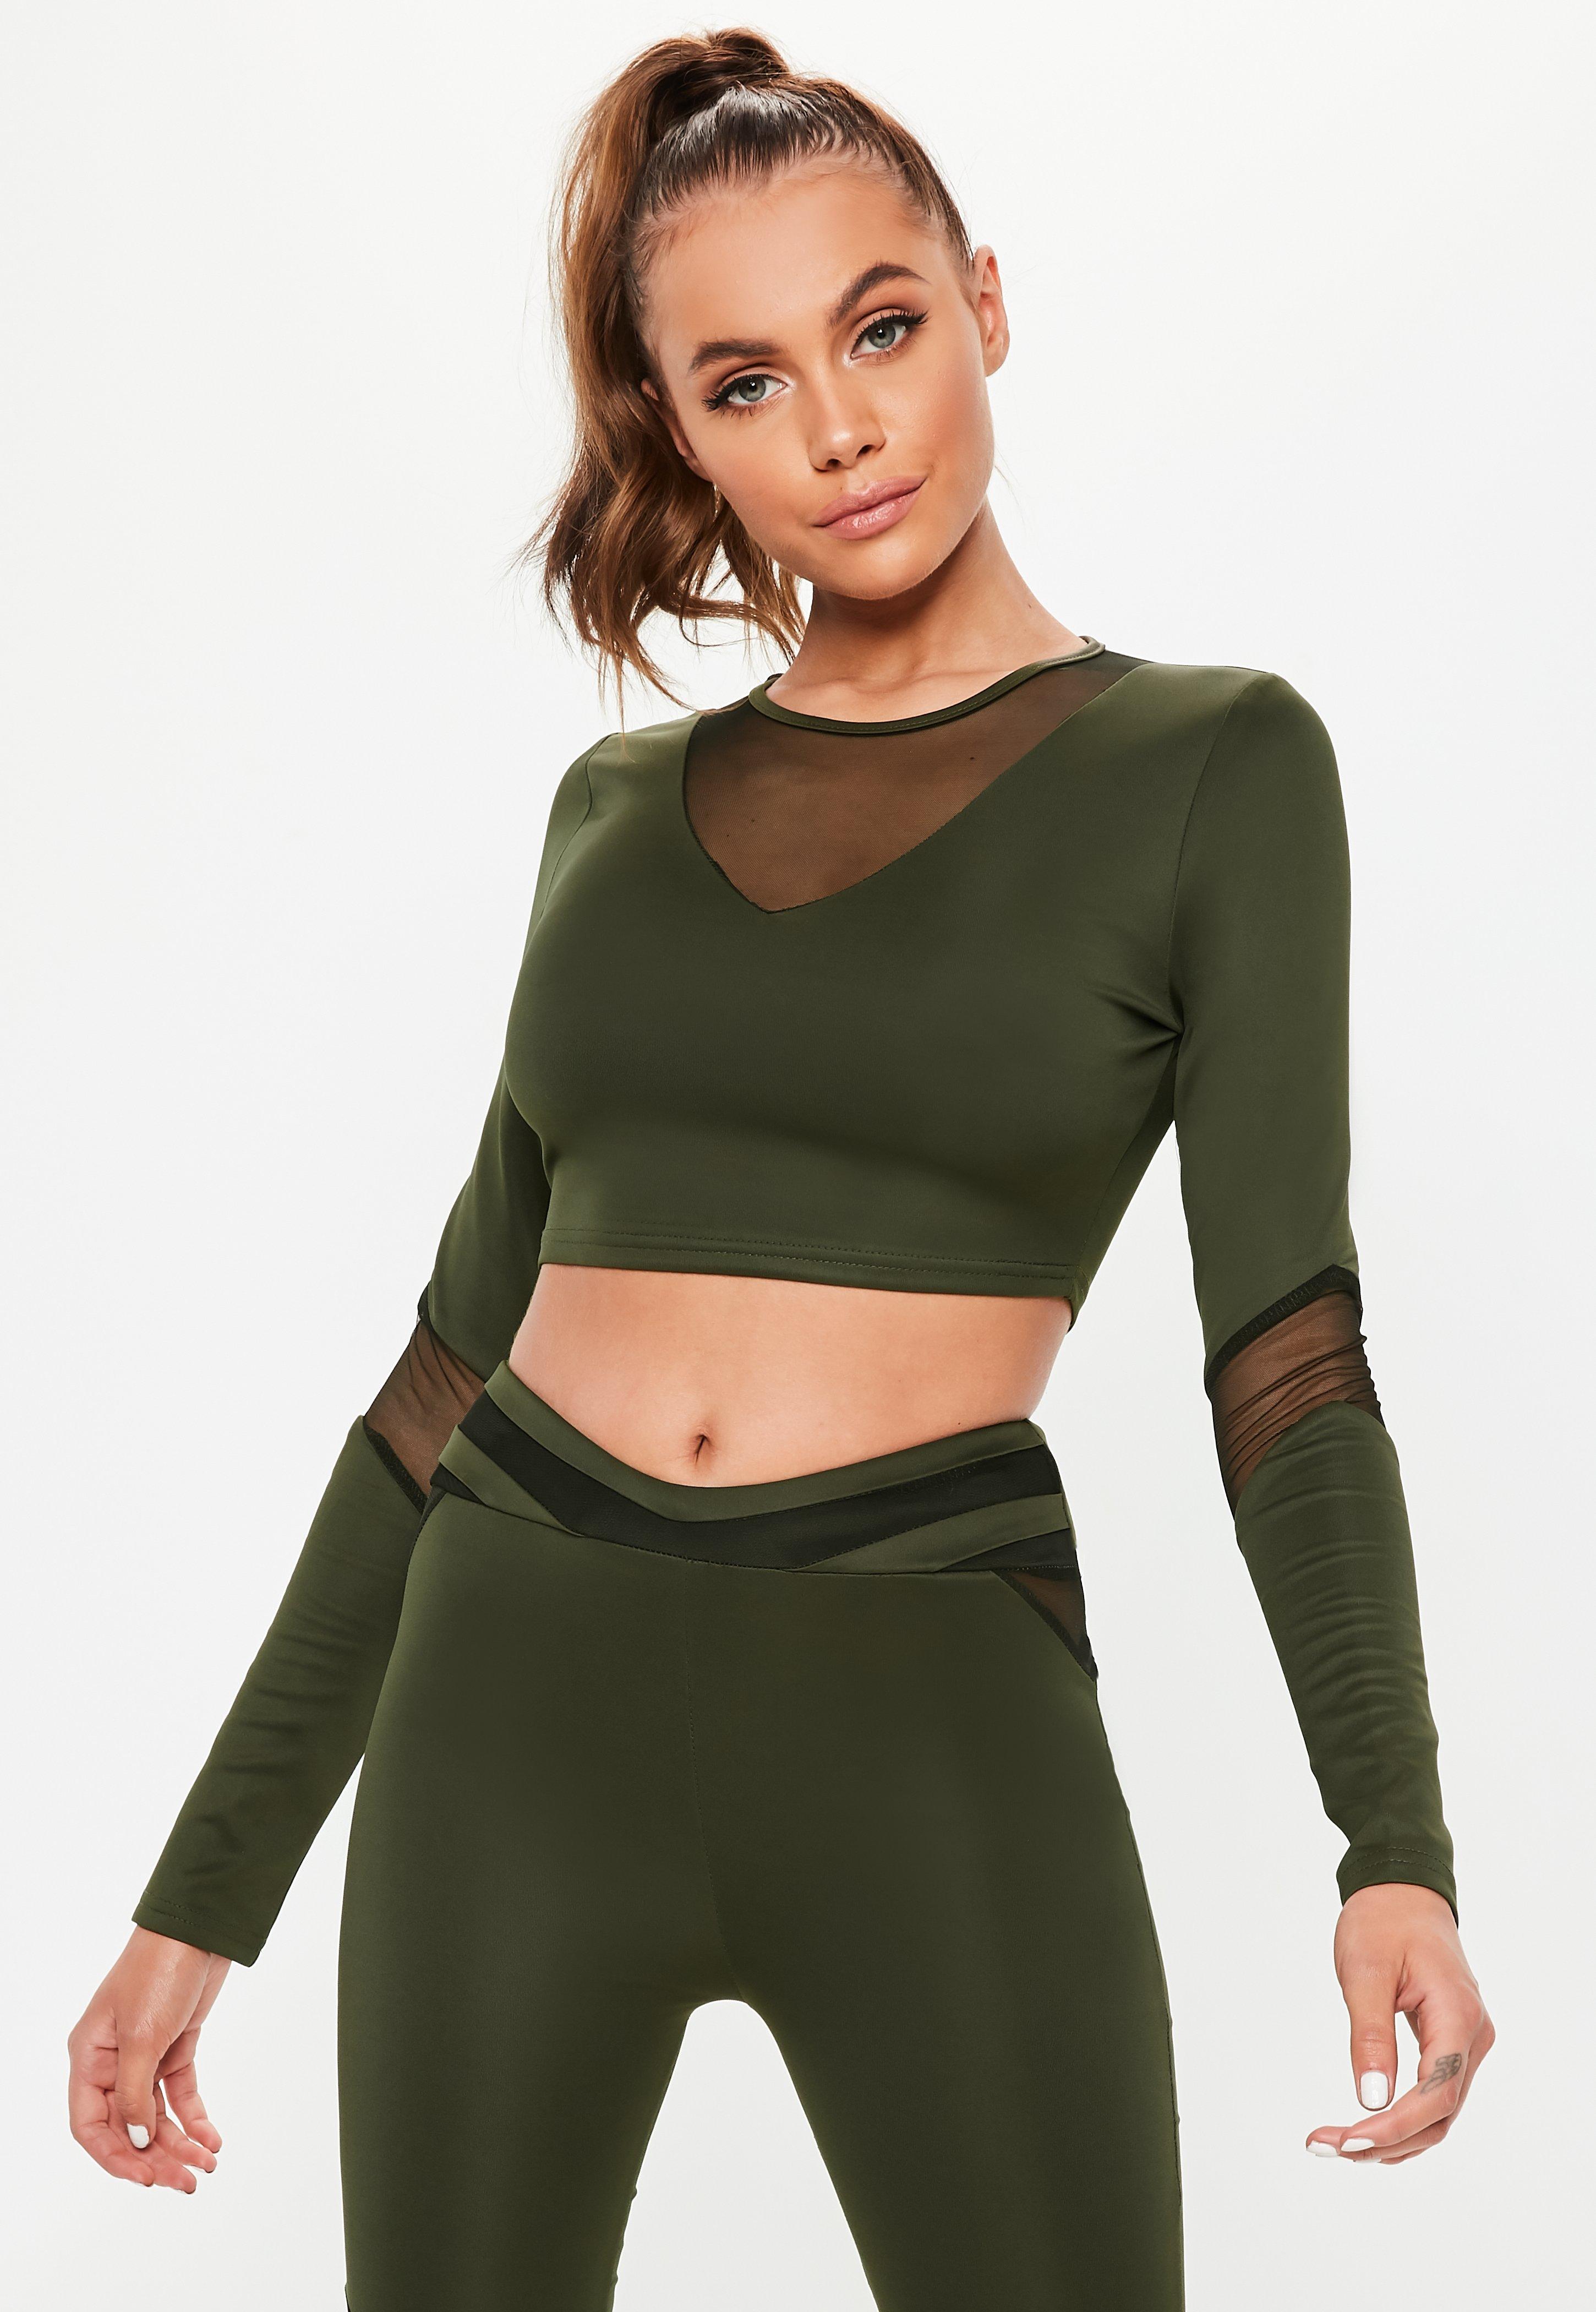 Lyst - Missguided Active Khaki Mesh Insert Cropped Long Sleeve Top in Green